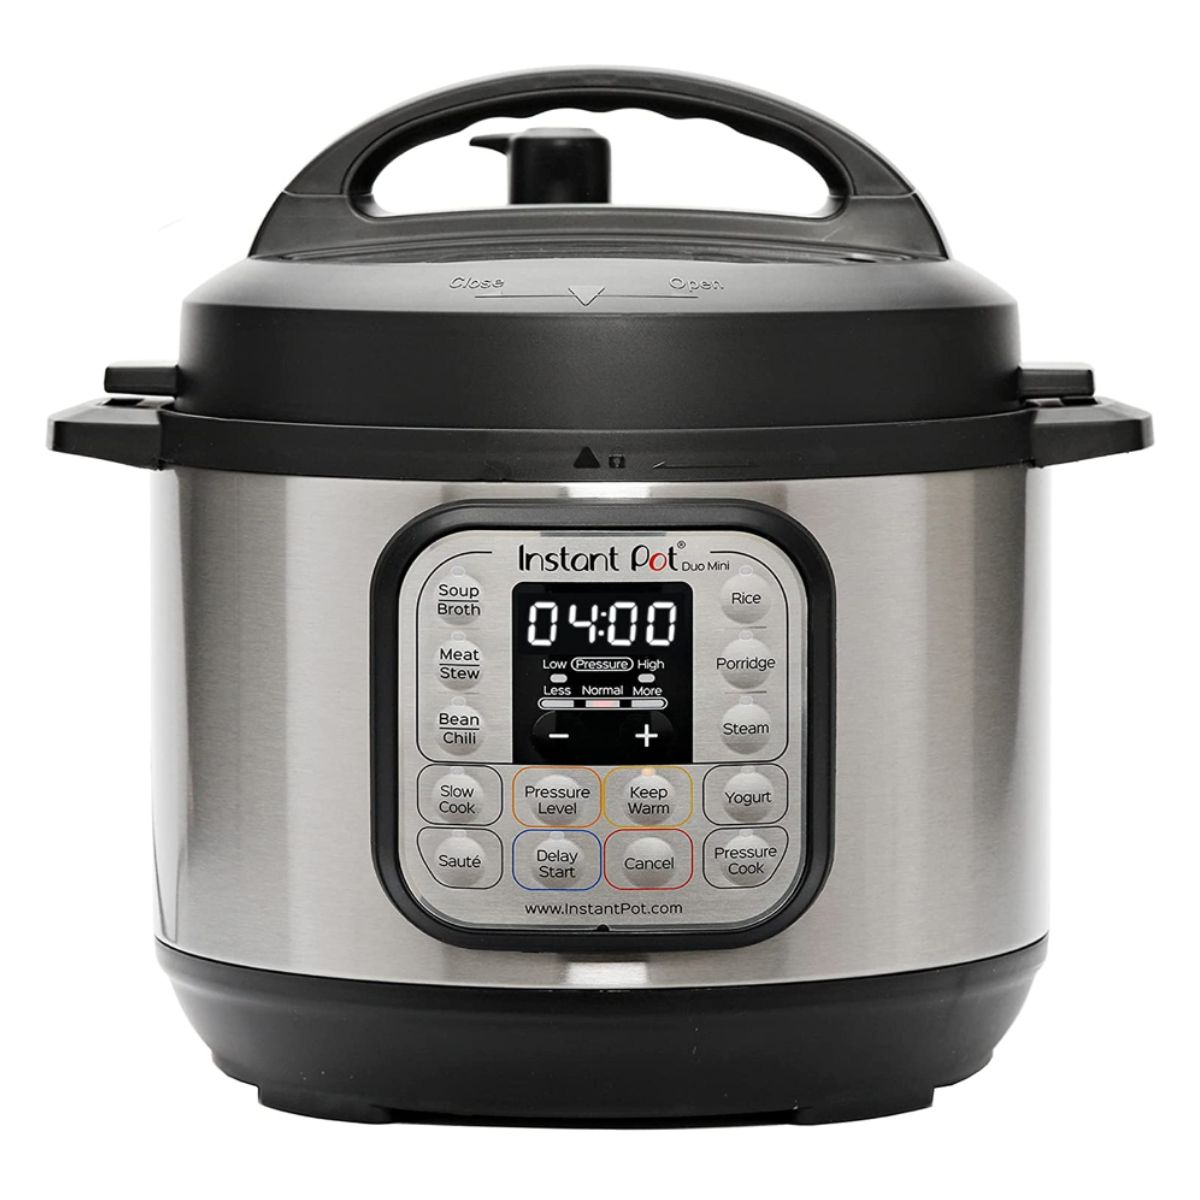 Instant Pot Duo 7-in-1 Mini Electric Pressure Cooker for $59.98